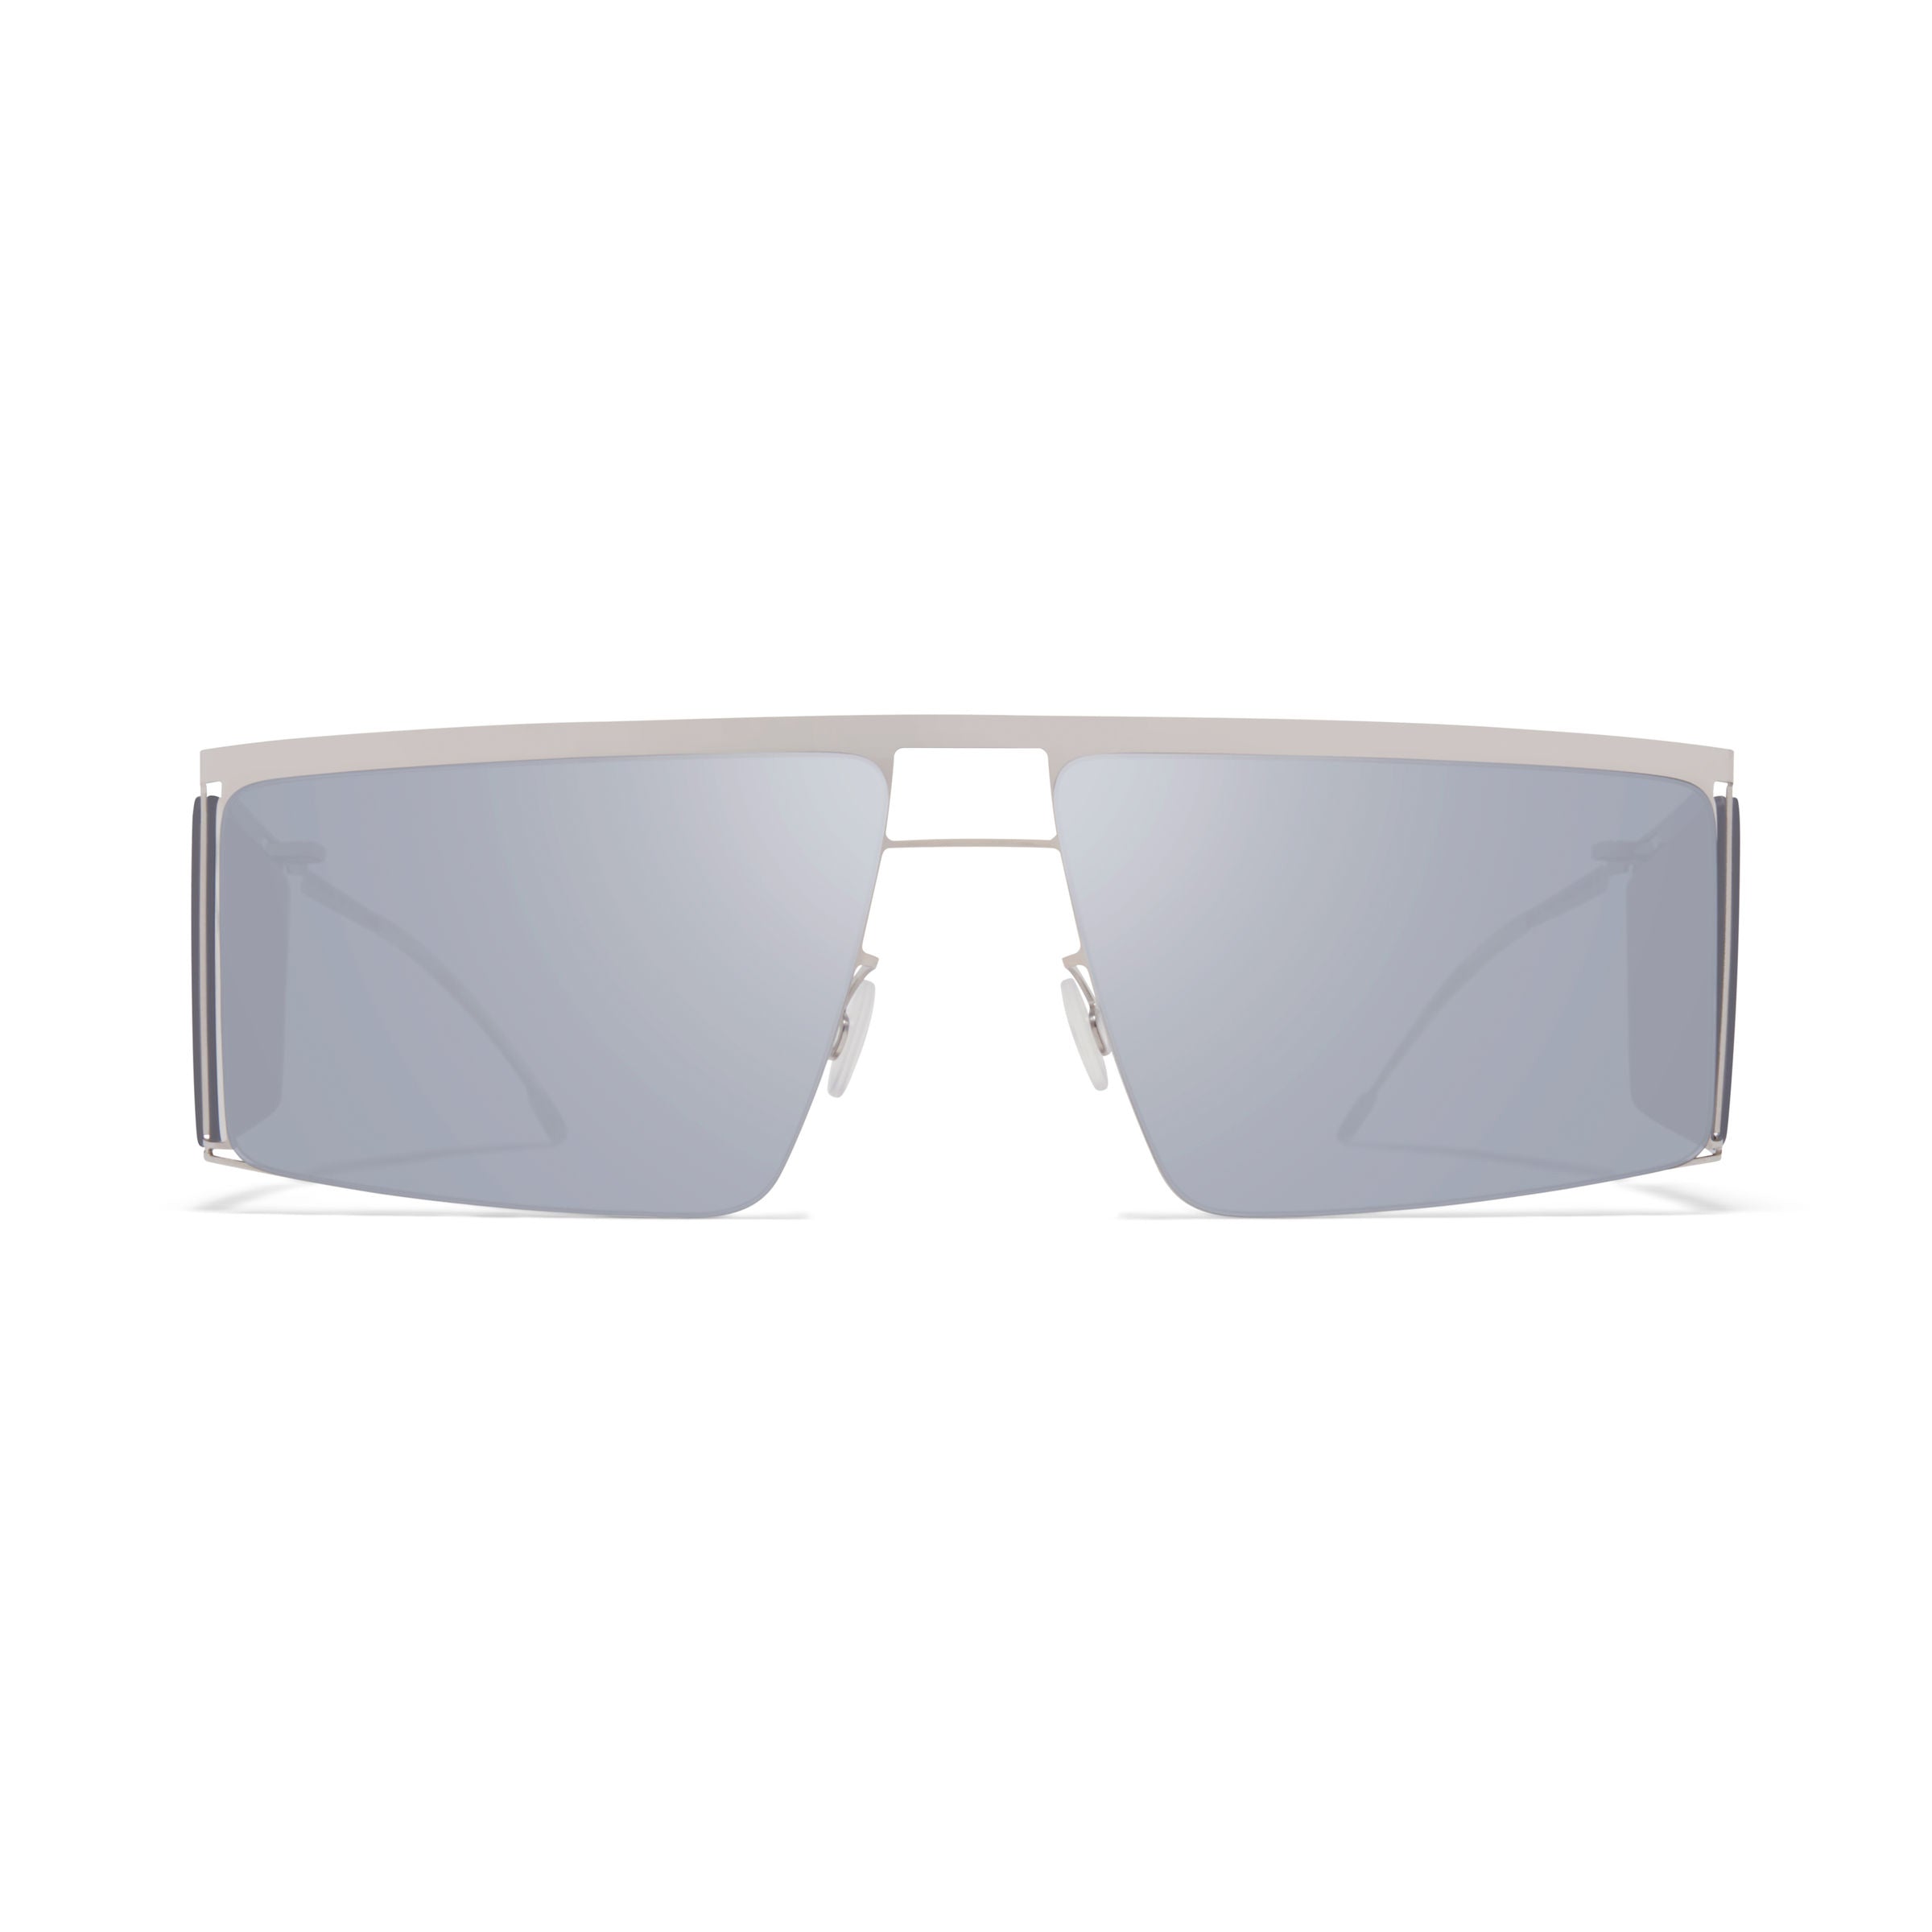 MYKITA x Helmut Lang // HL001 in Shiny Silver/Soft Grey Sides with Silver Flash Lenses